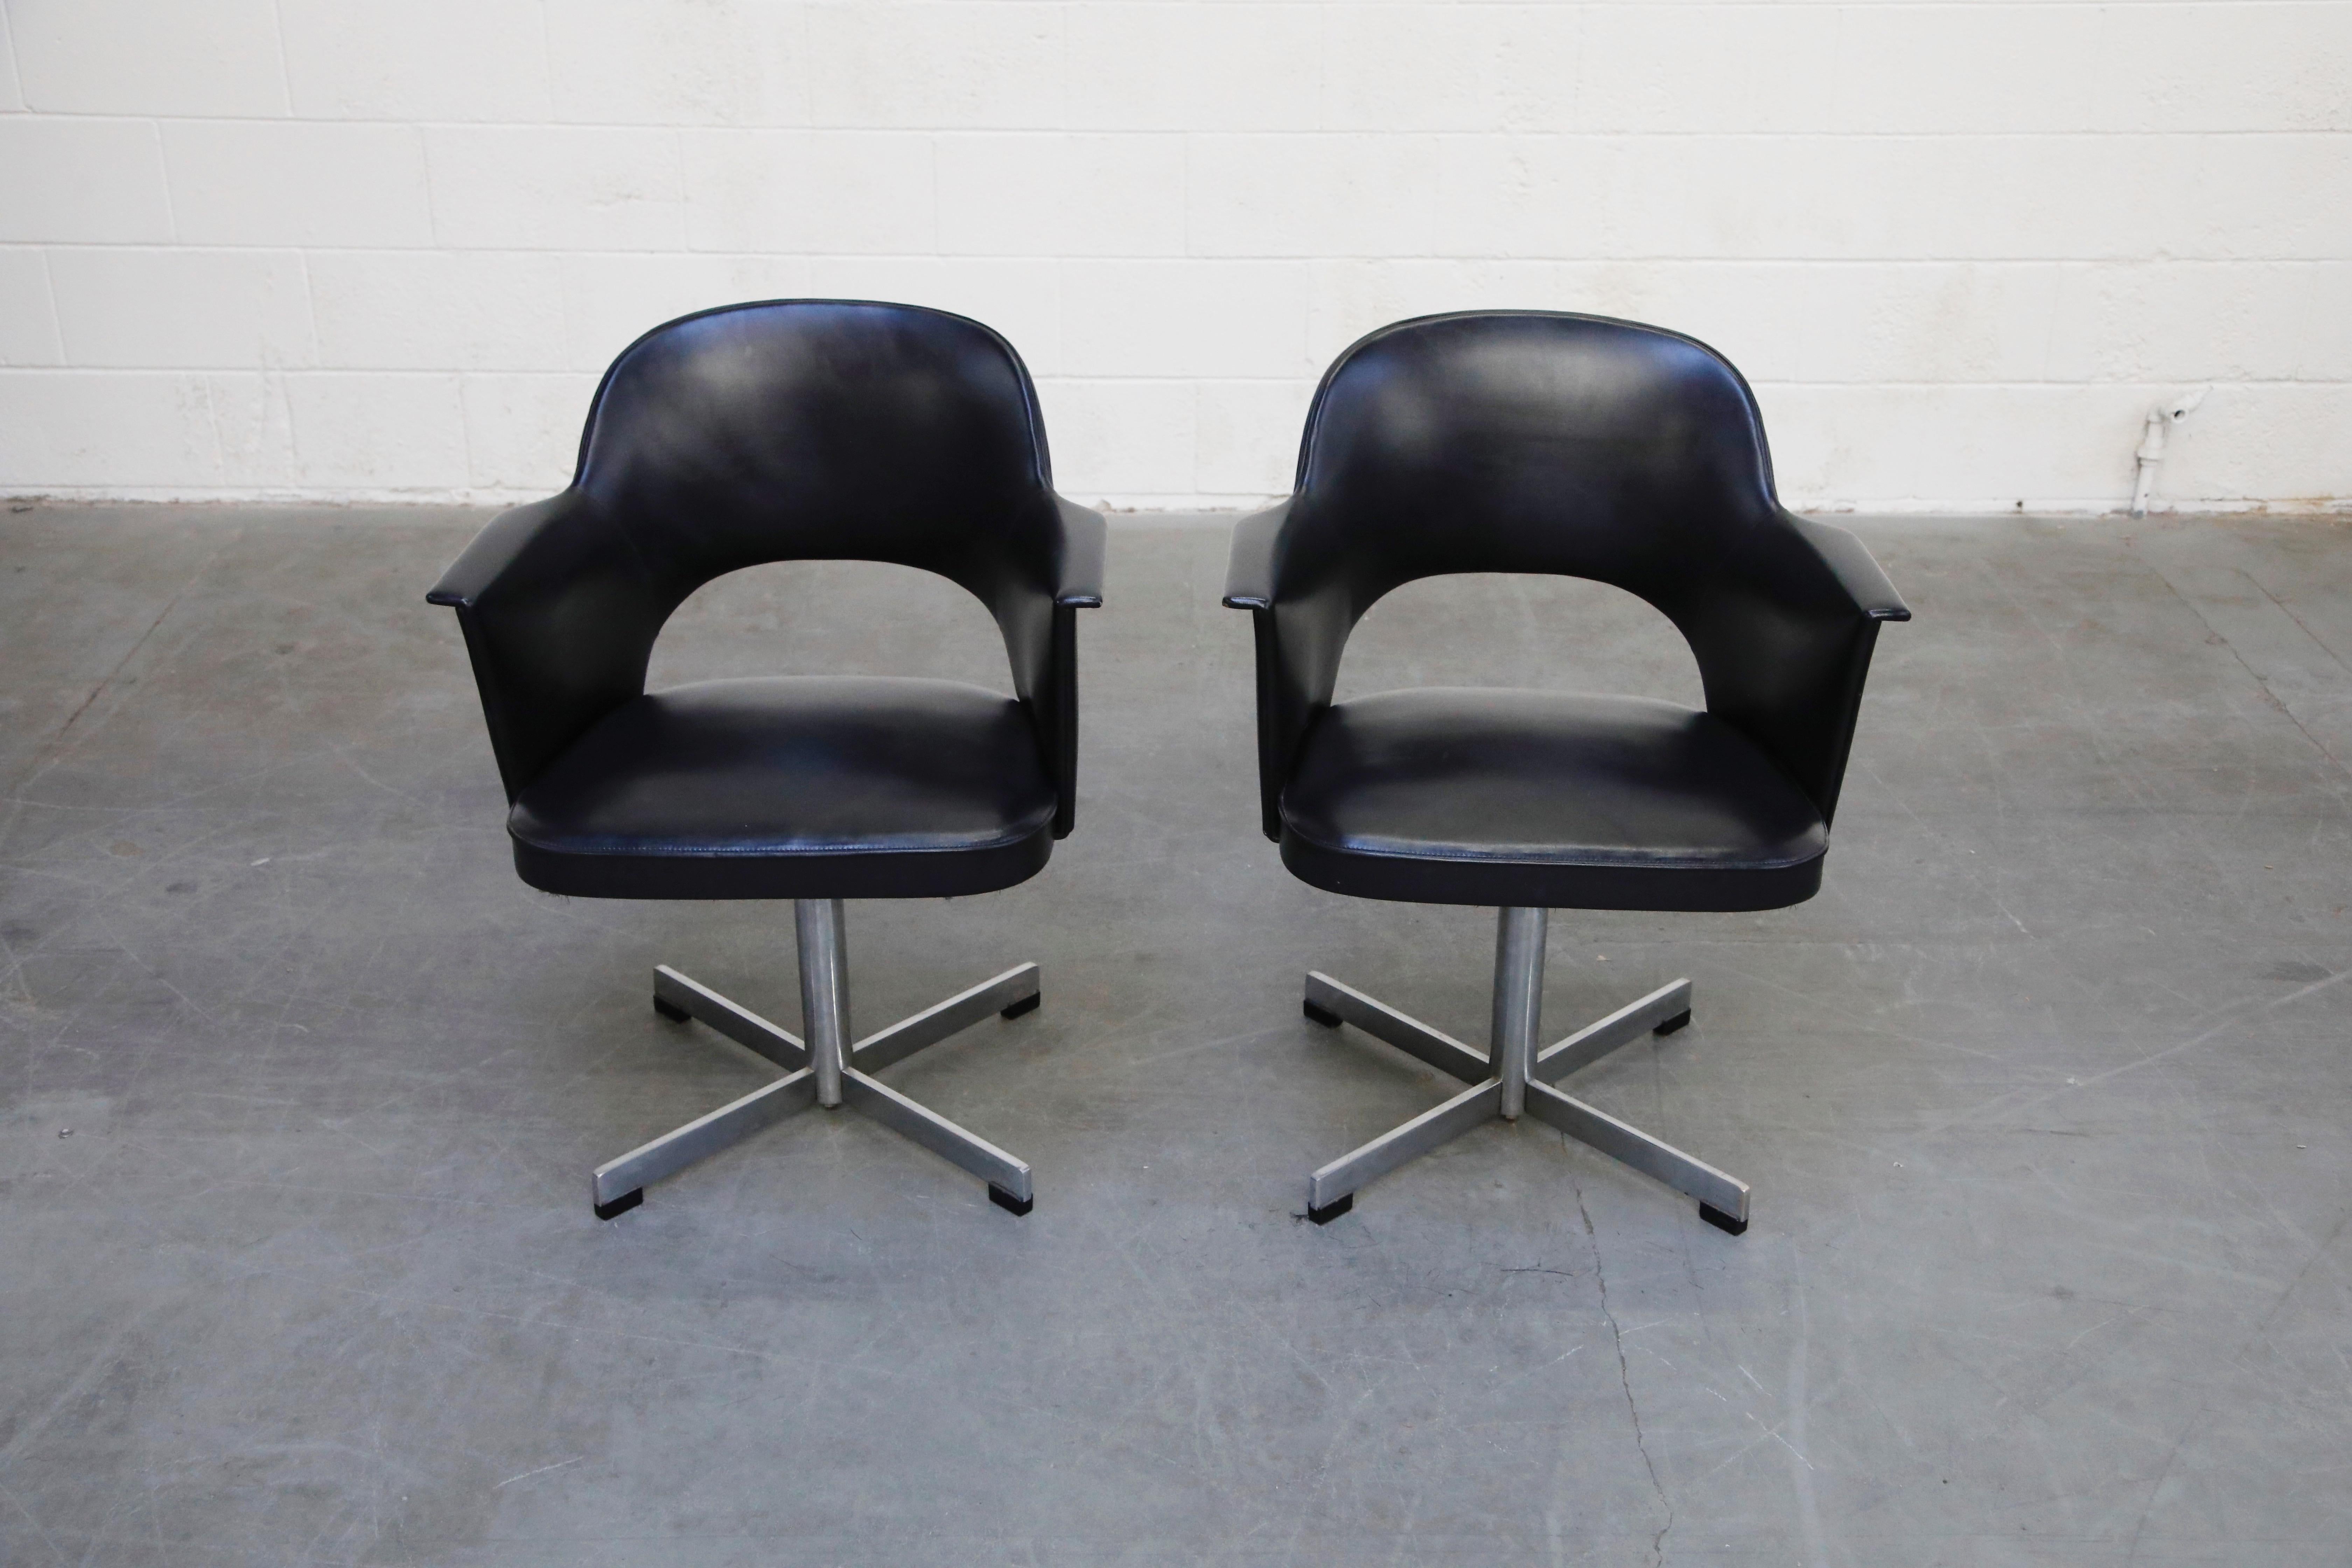 This stylish pair of swivel armchairs are by Thonet, circa 1960s. Featuring Thonet labels underneath the seat, Eero Saarinen styled open back, Fabricius & Kastholm styled tulip arms, sleek four prong swivel base, and a beautiful silhouette in its